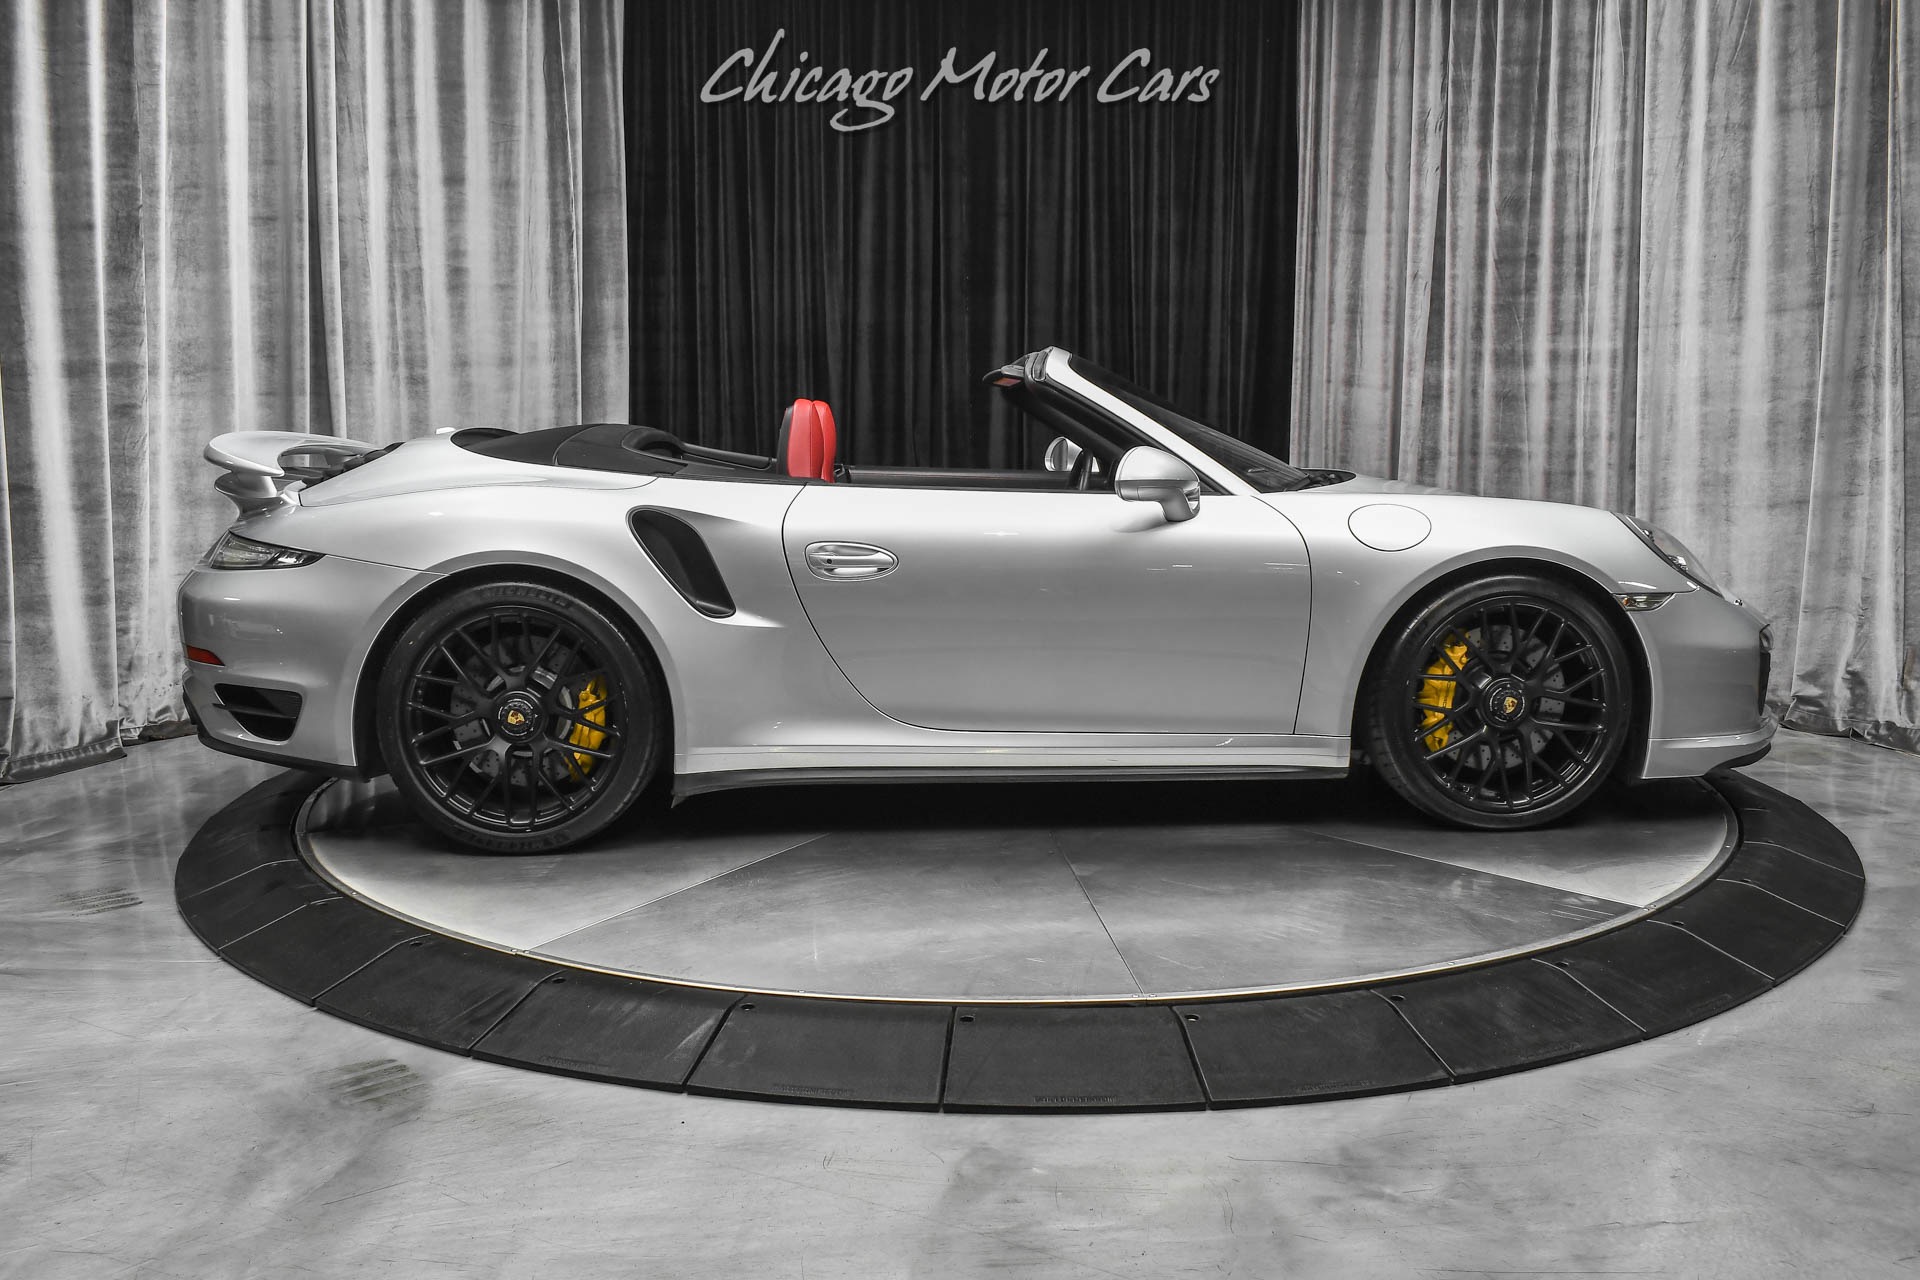 Used-2014-Porsche-911-Turbo-S-Convertible-Carbon-Trim-Upgraded-Exhaust-Porsche-Entry---Drive